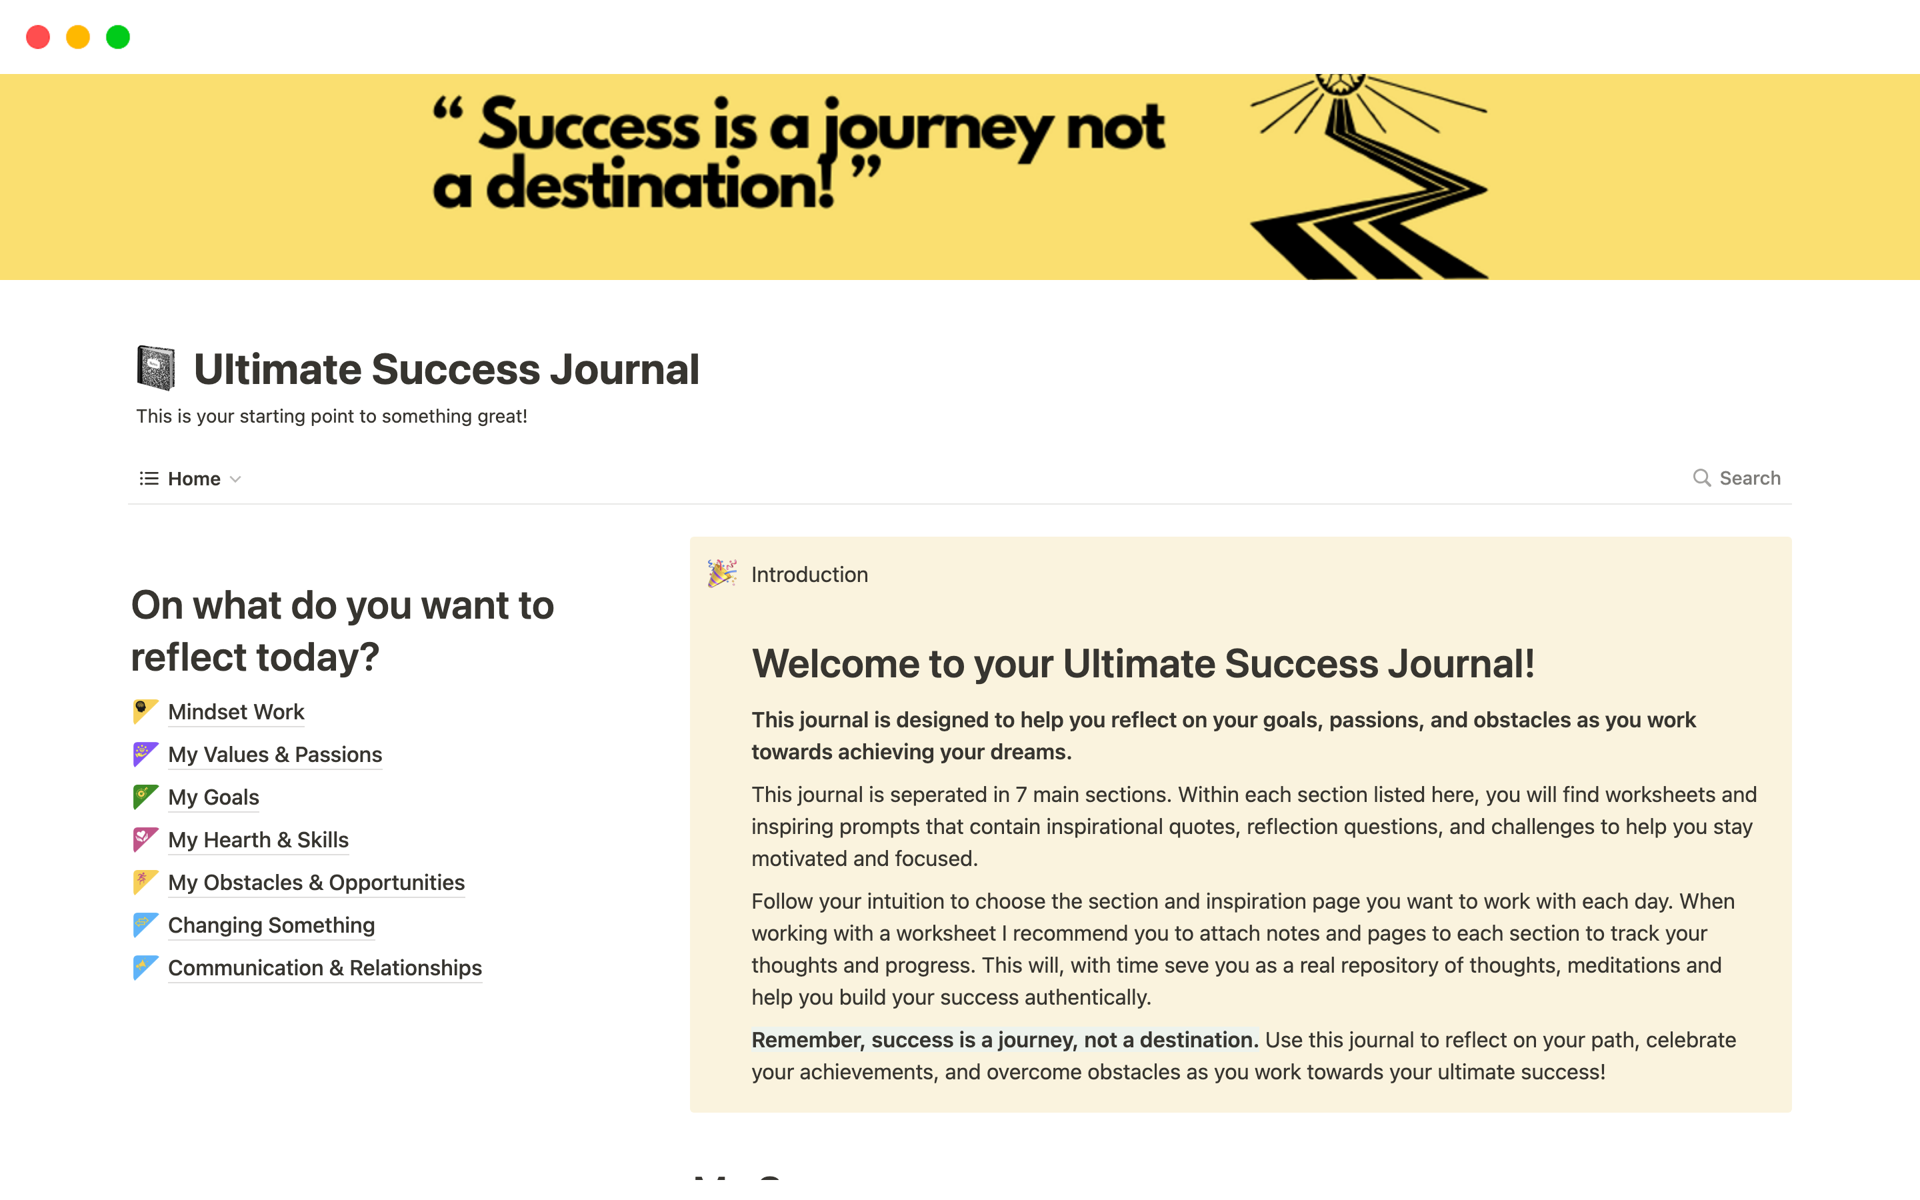 The "Ultimate Notion Success Journal" is your guide to breaking free from societal norms, setting meaningful goals, and conquering self-doubt on your journey towards empowerment and fulfillment.